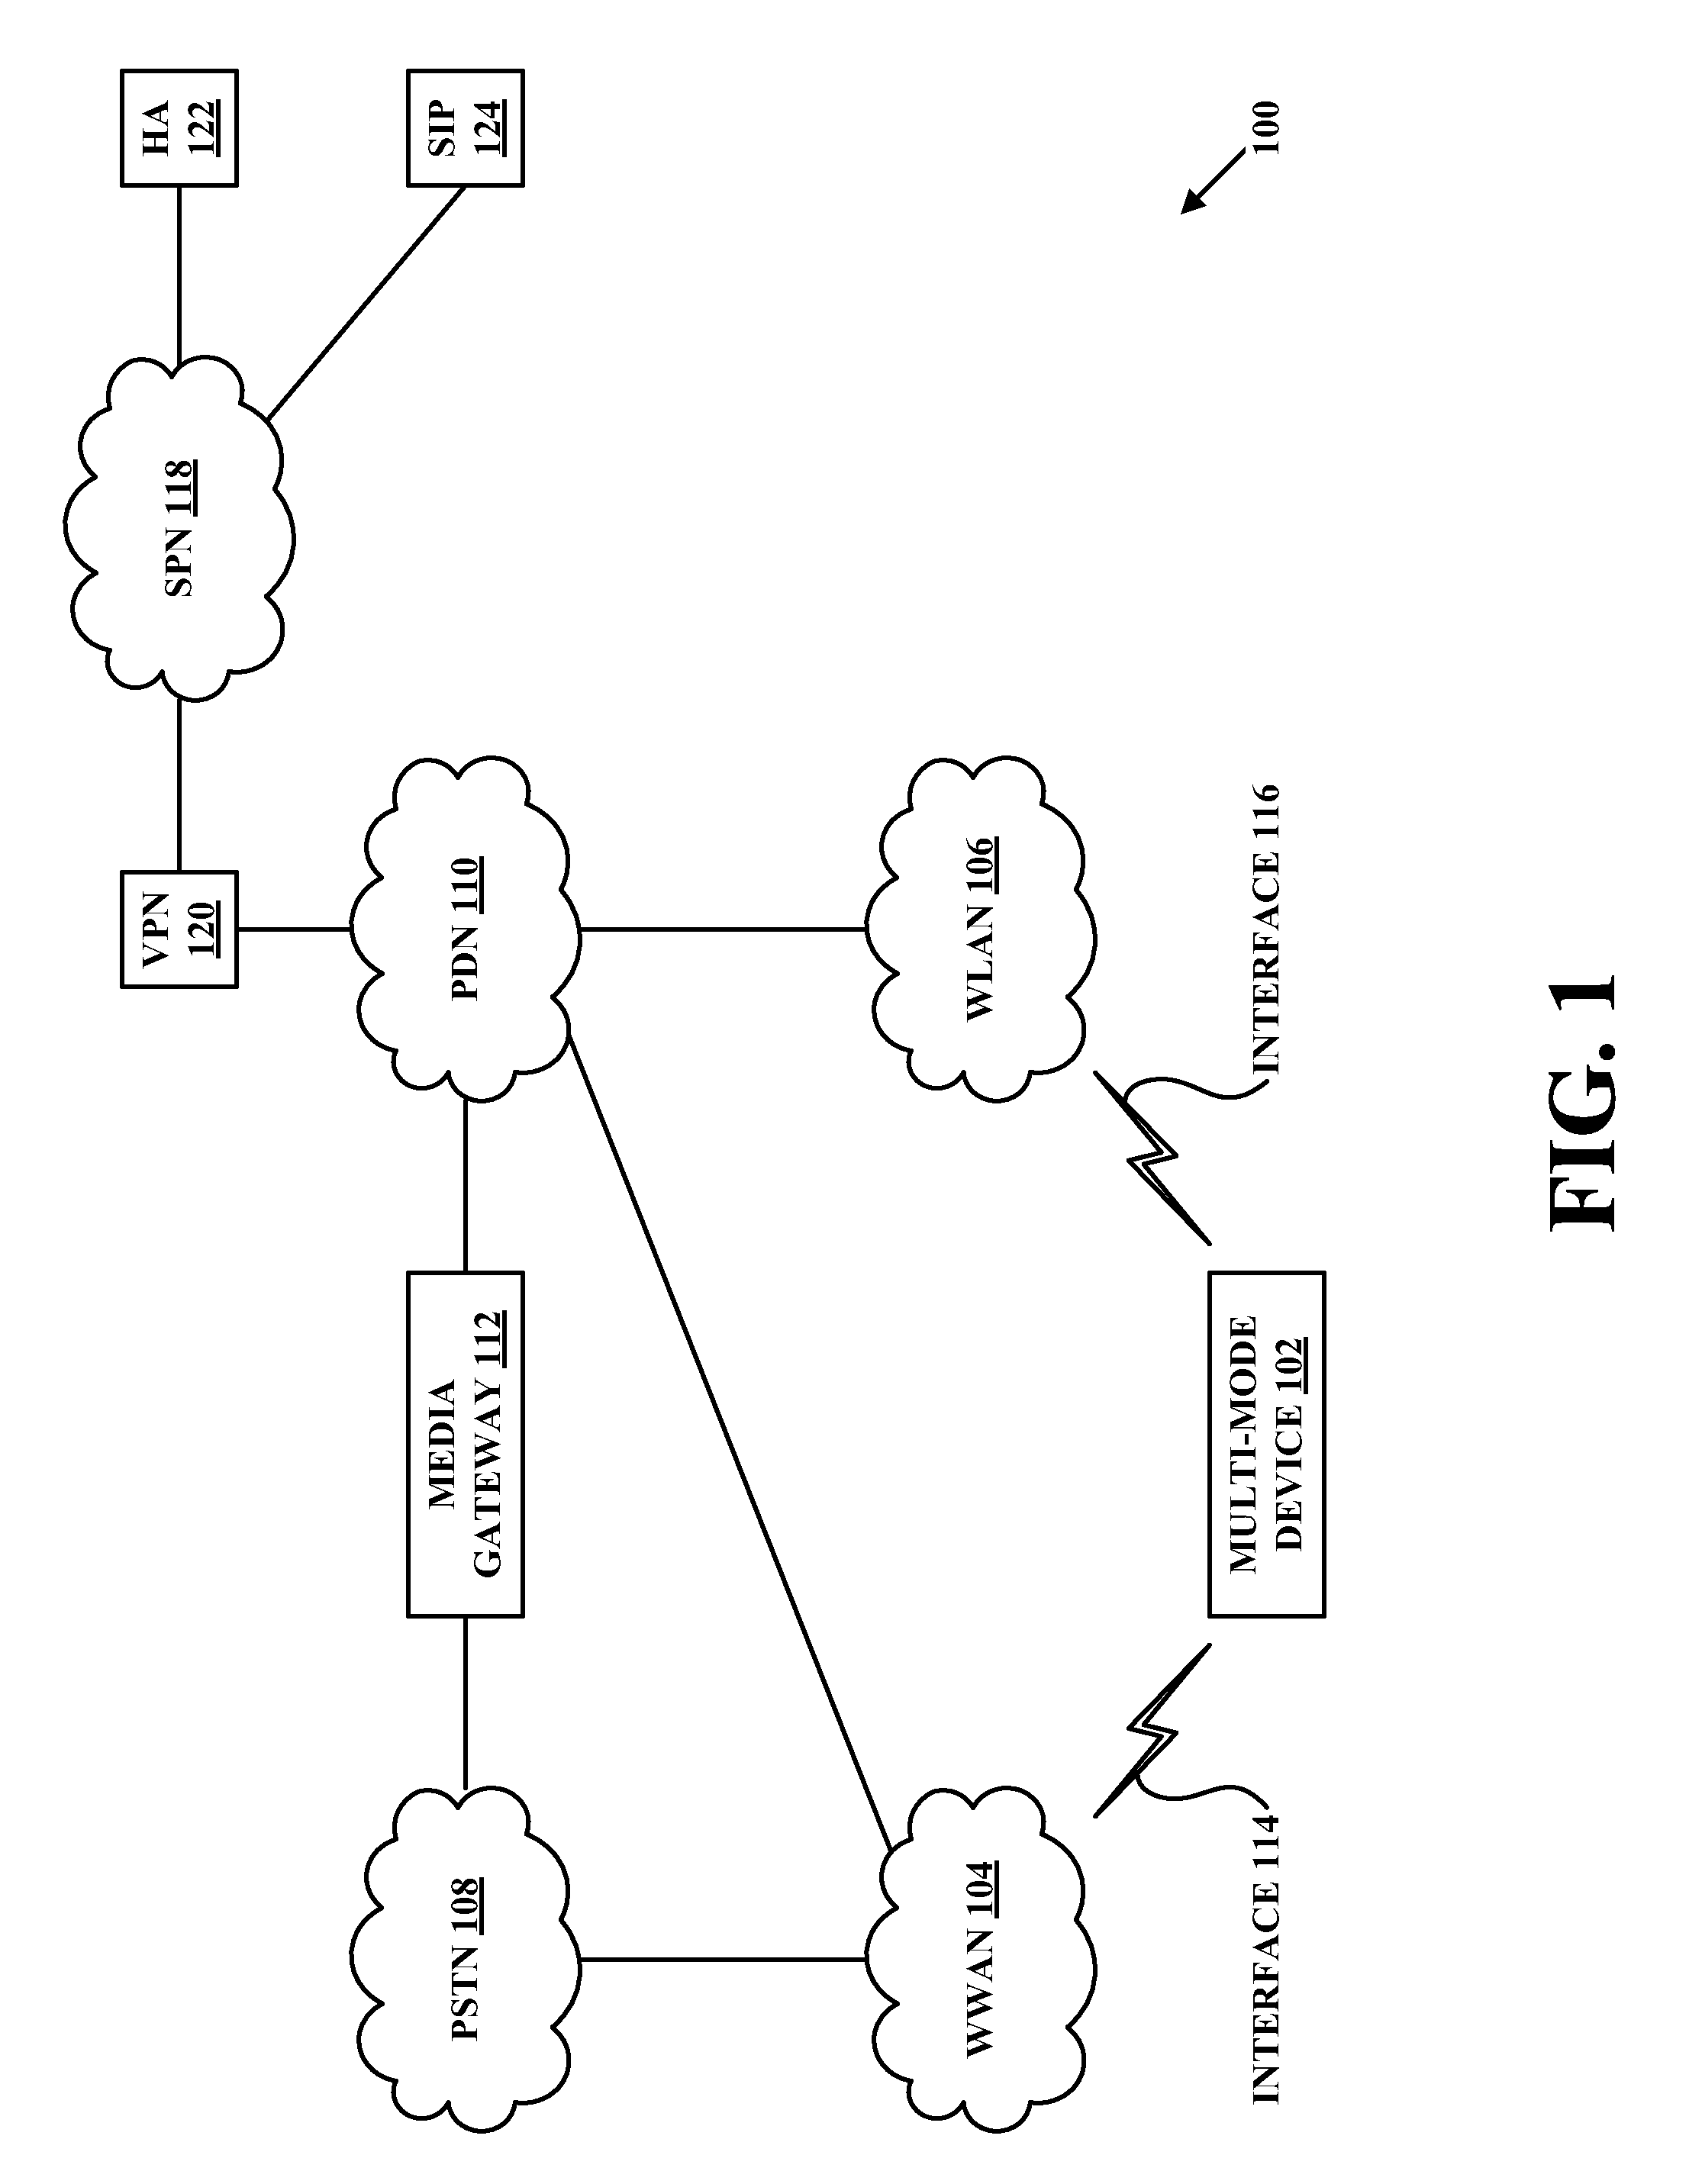 Selective scanning for WLAN coverage by a multi-mode device